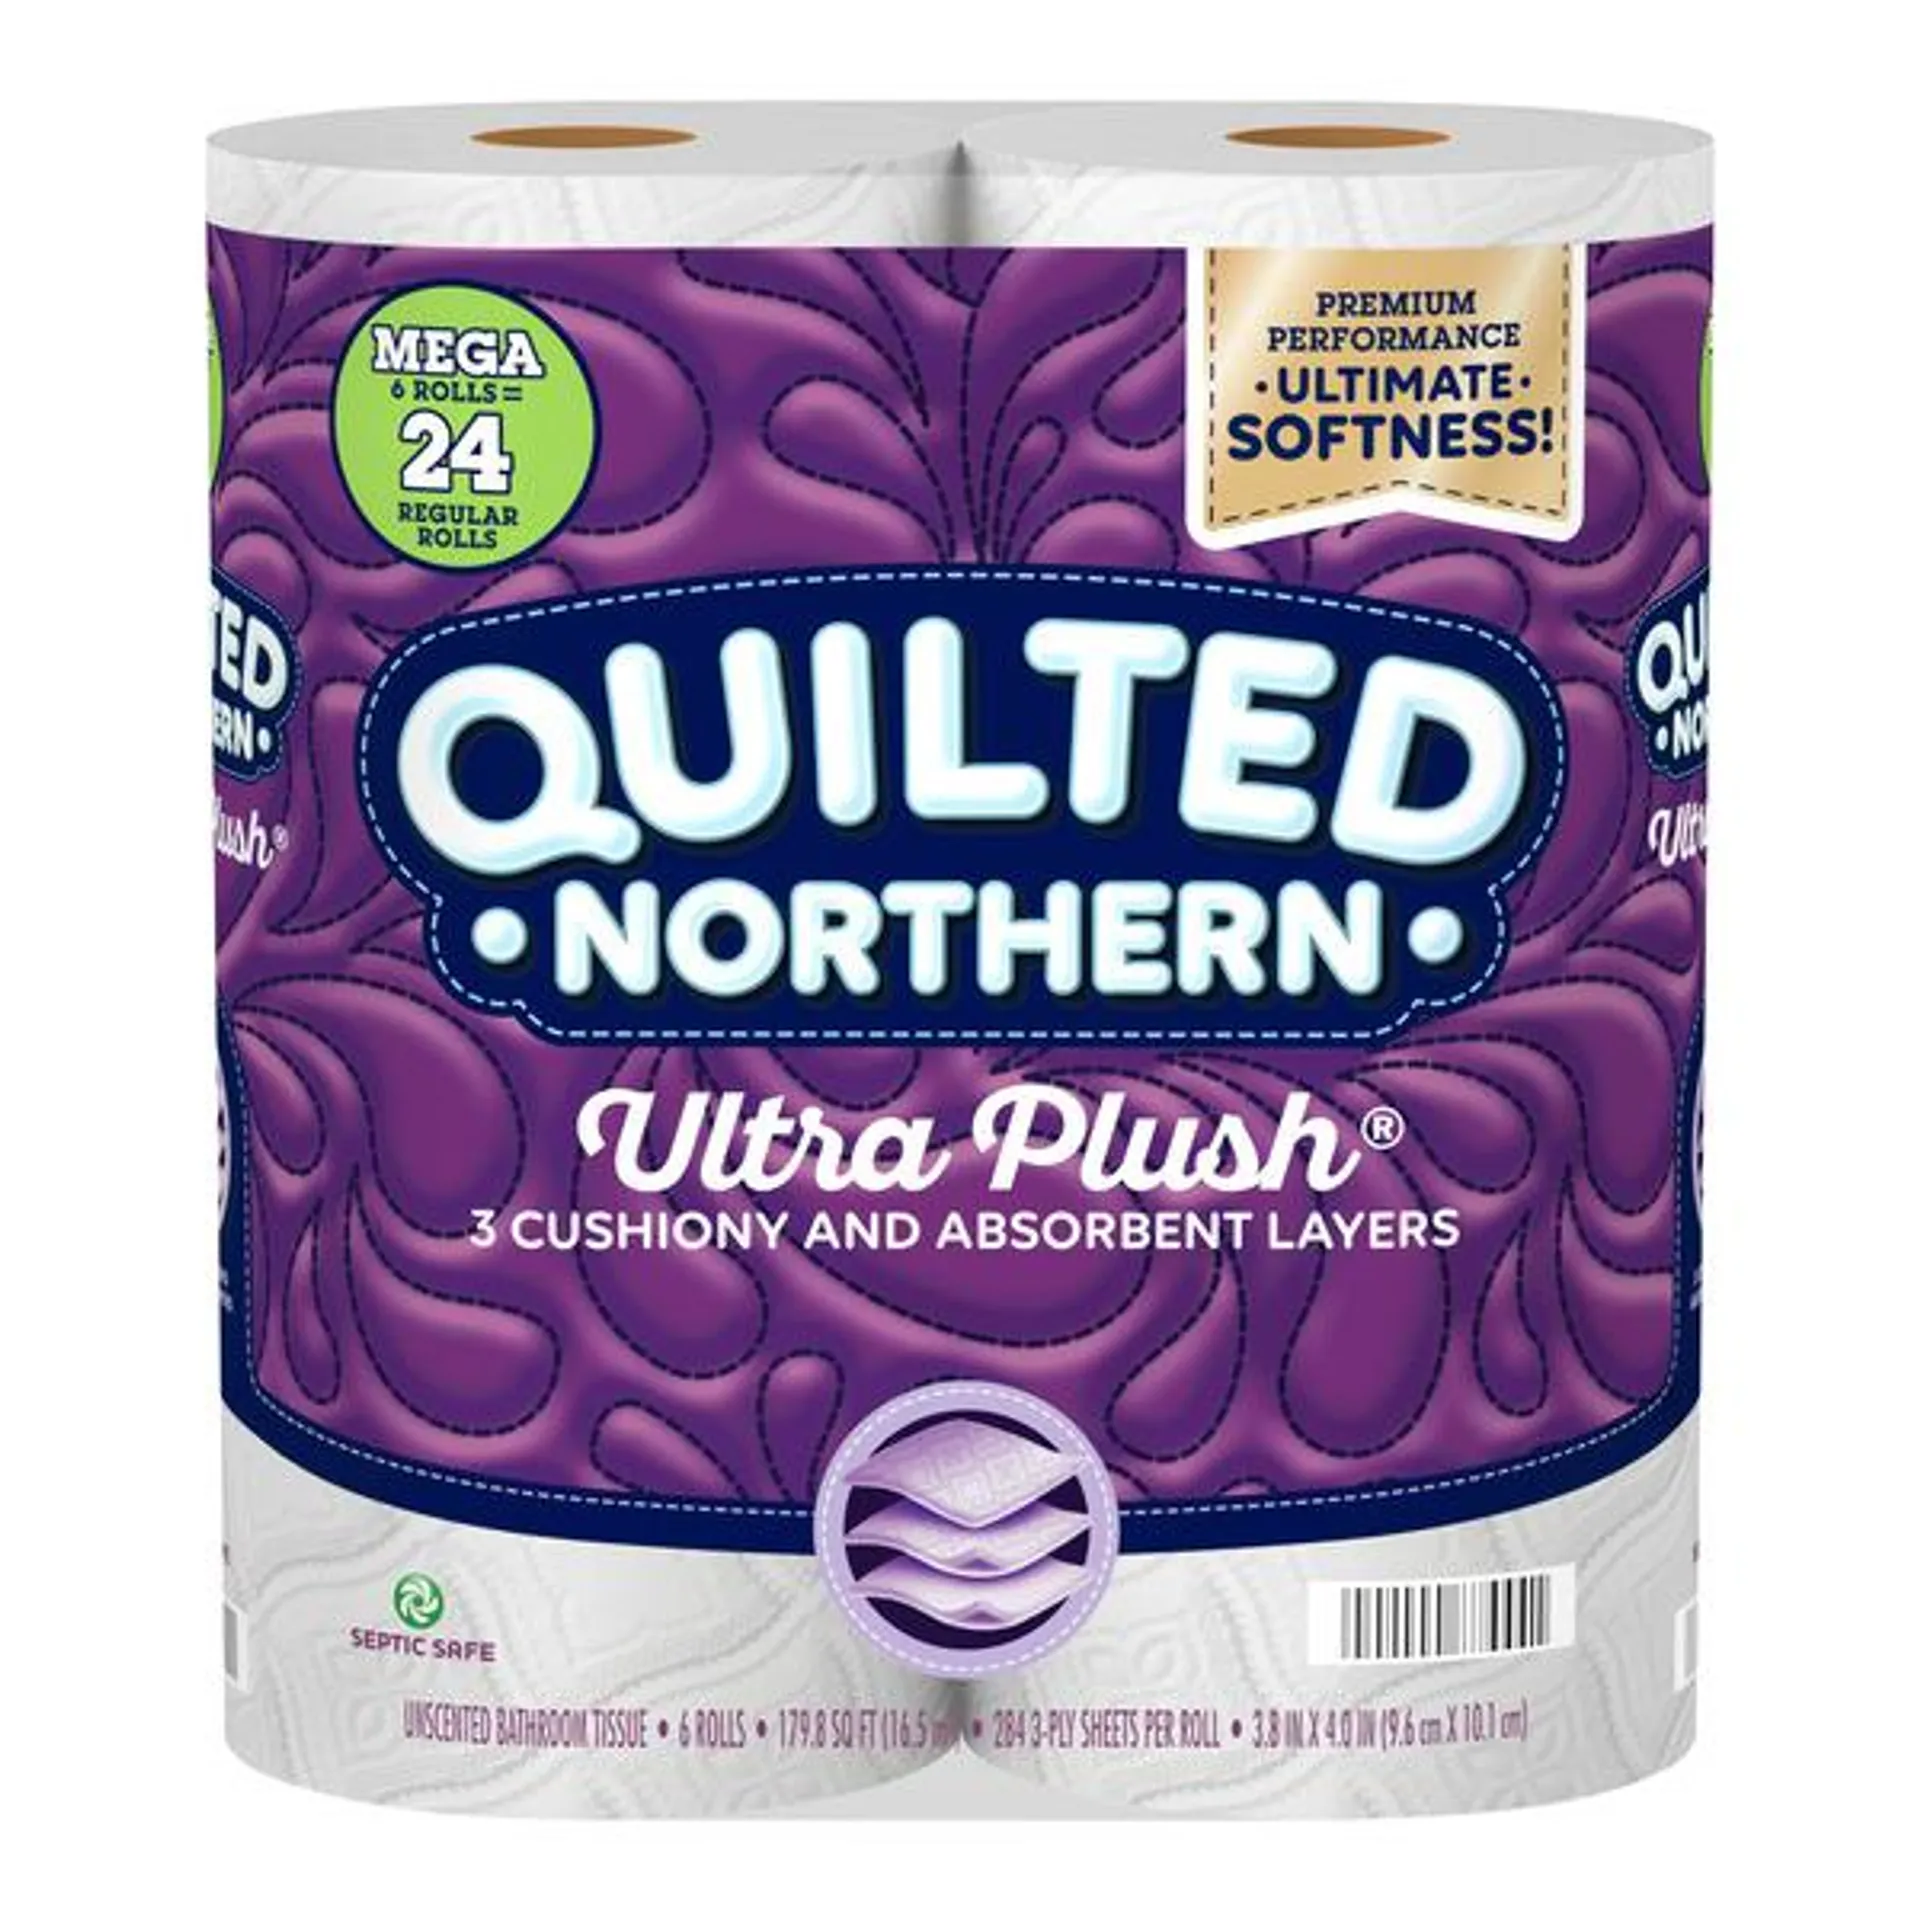 Quilted Northern Toilet Paper, Mega Rolls